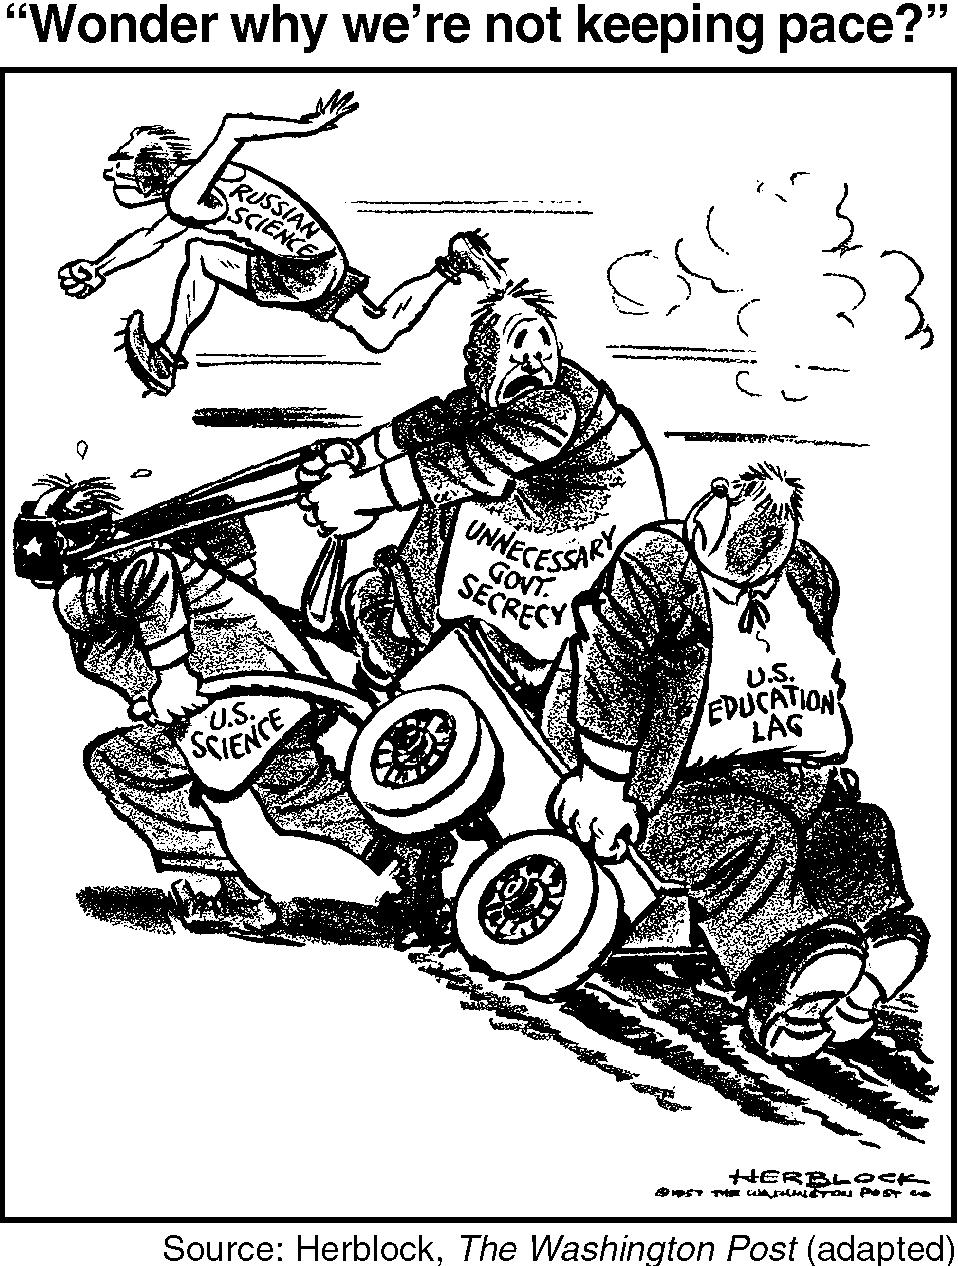 25. Base your answer on the cartoon below and on your knowledge of Which event of the 1950s most likely led to the publication of this cartoon?